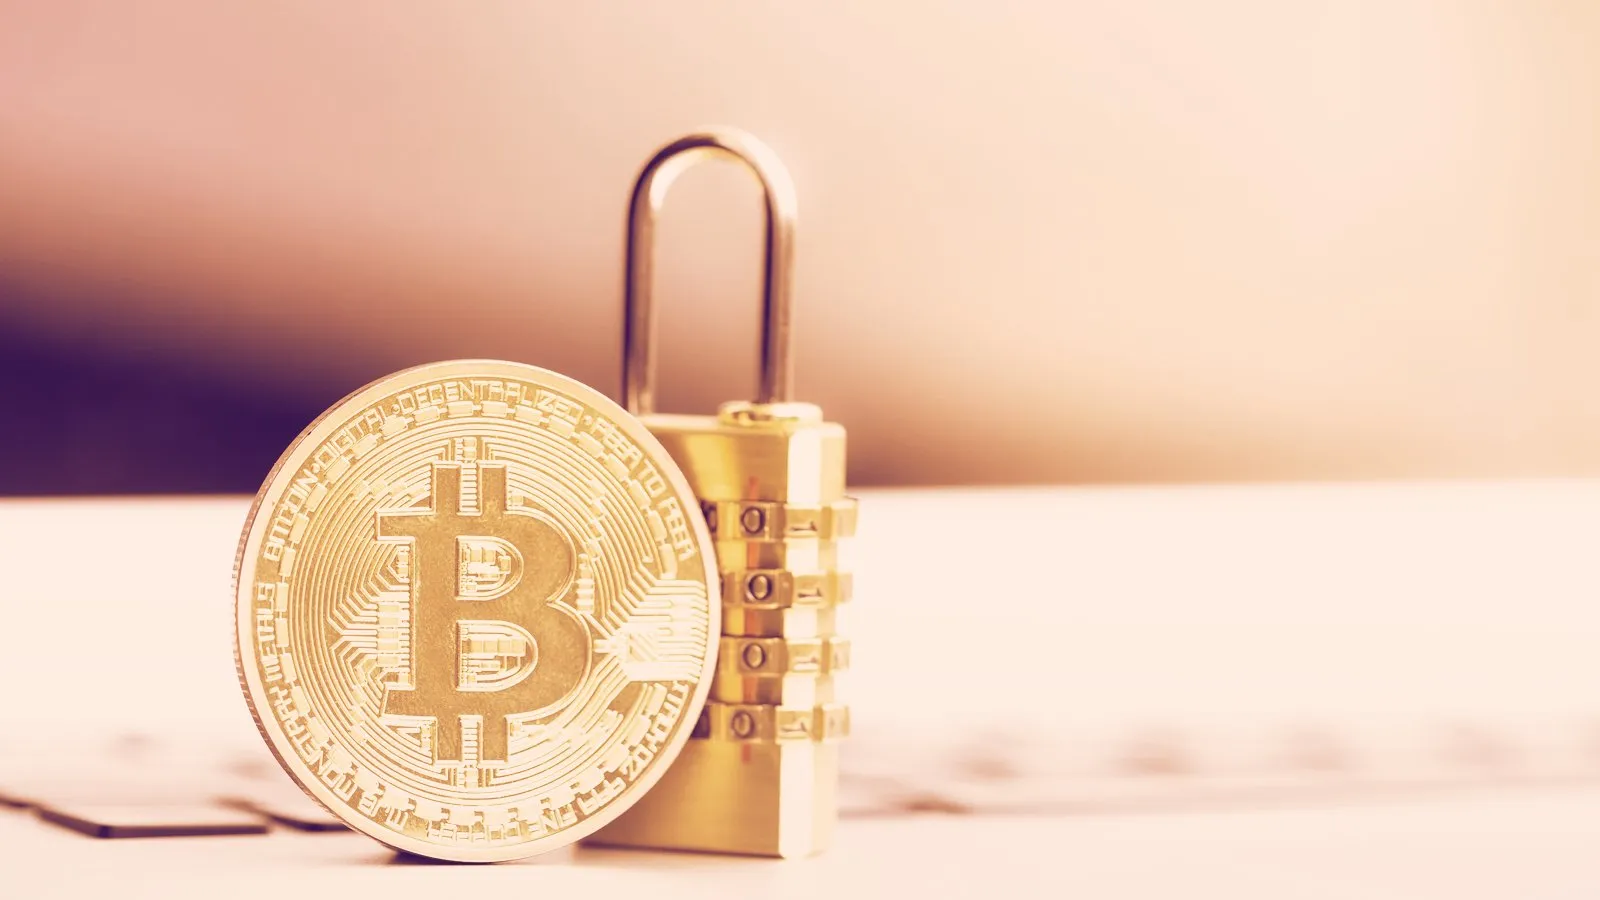 CoinSwap, an old privacy protocol, could solve Bitcoin’s anonymity problem for good. Image: Shutterstock